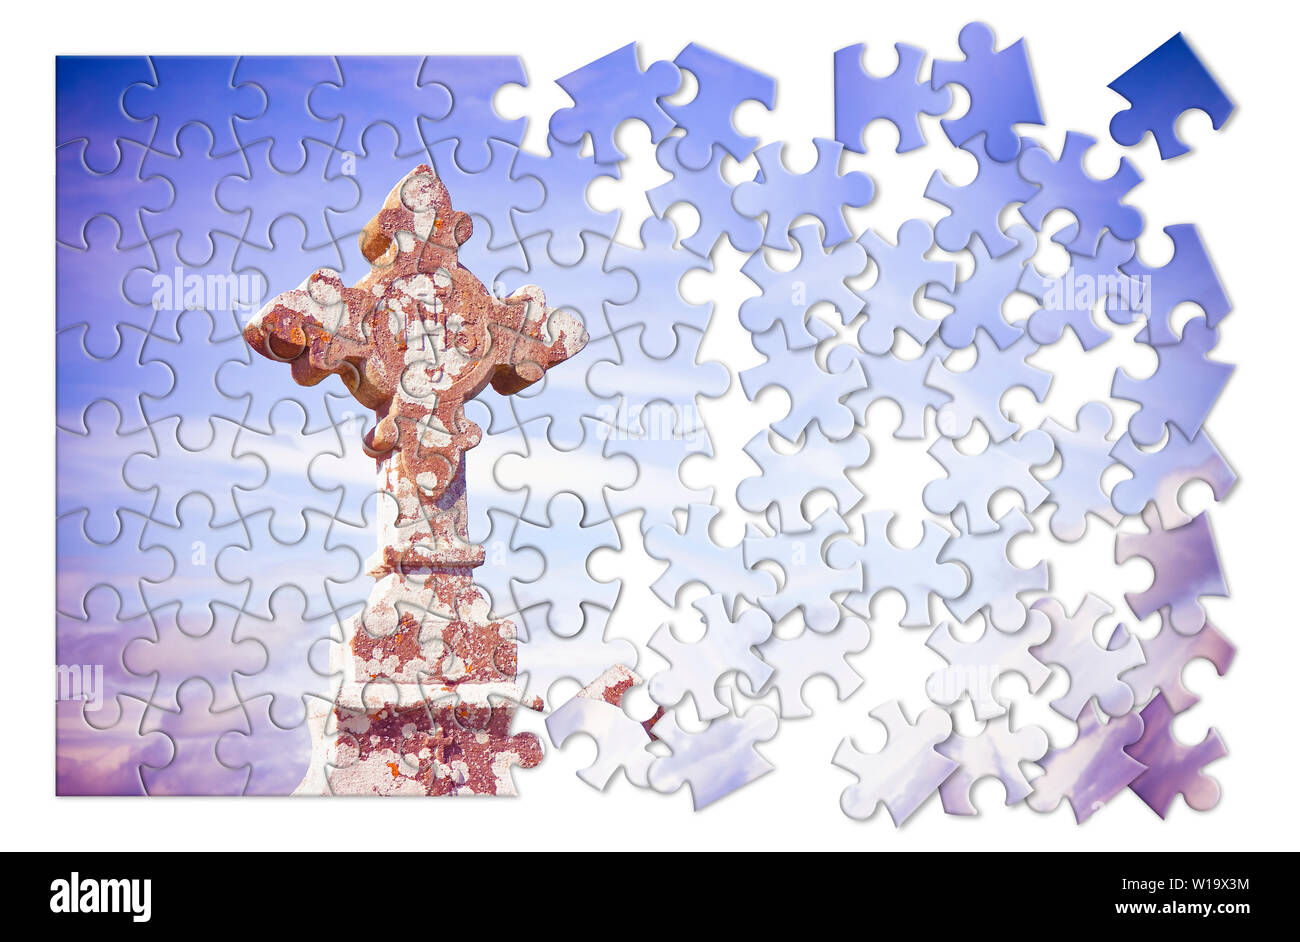 Patiently building of faith - Celtic carved stone cross against a sky background - concept image in jigsaw puzzle shape Stock Photo